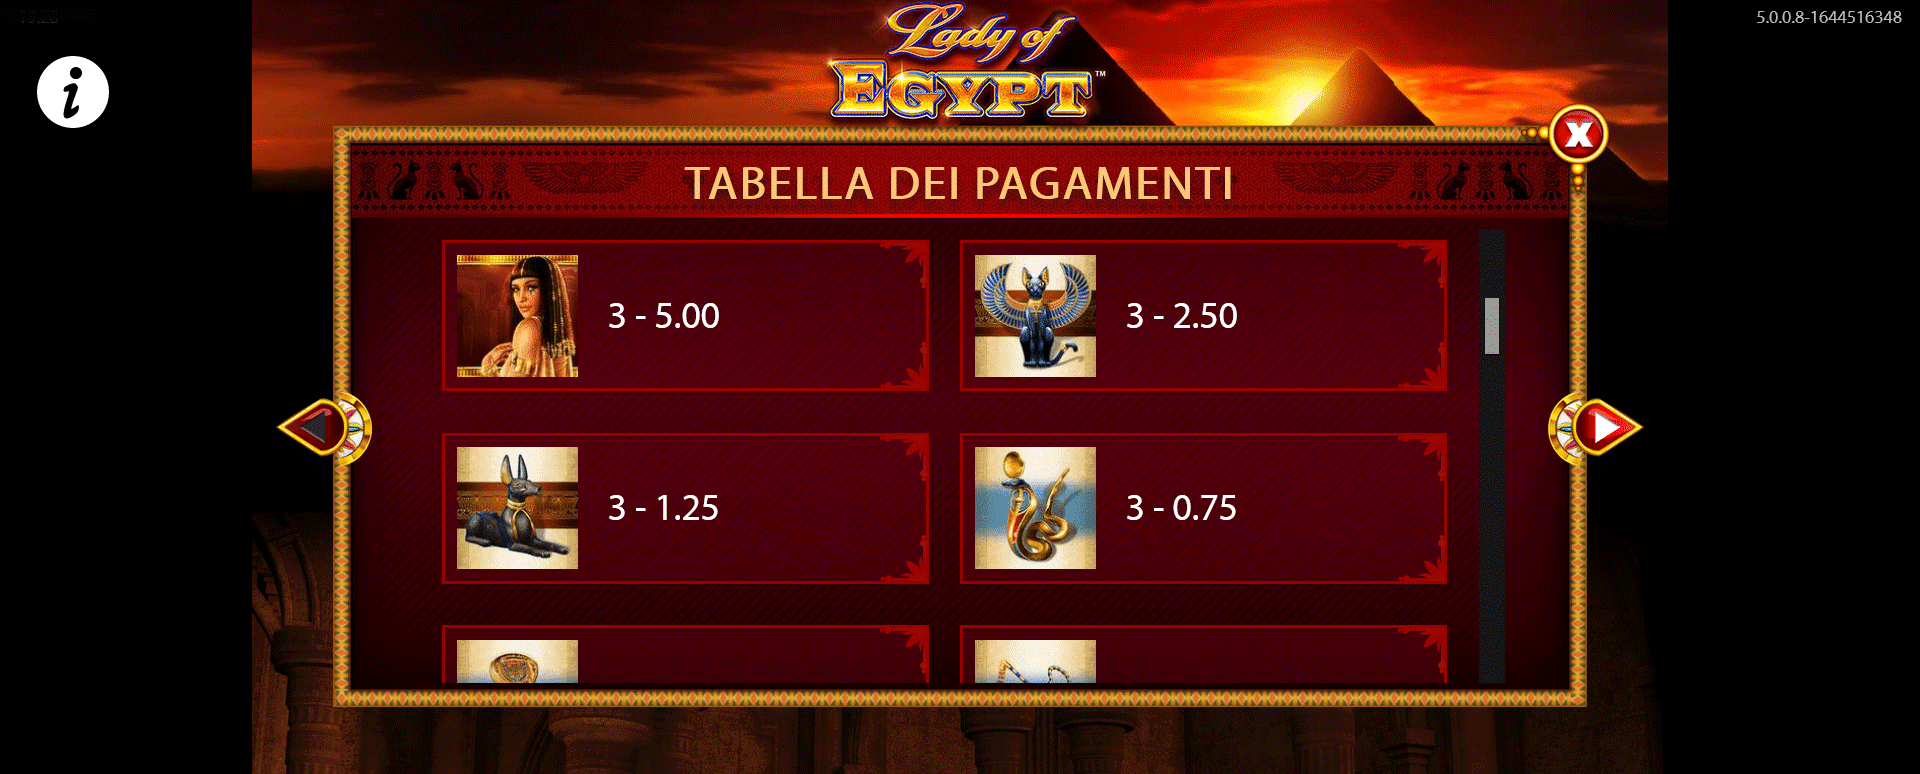 paytable slot online lady of egypt